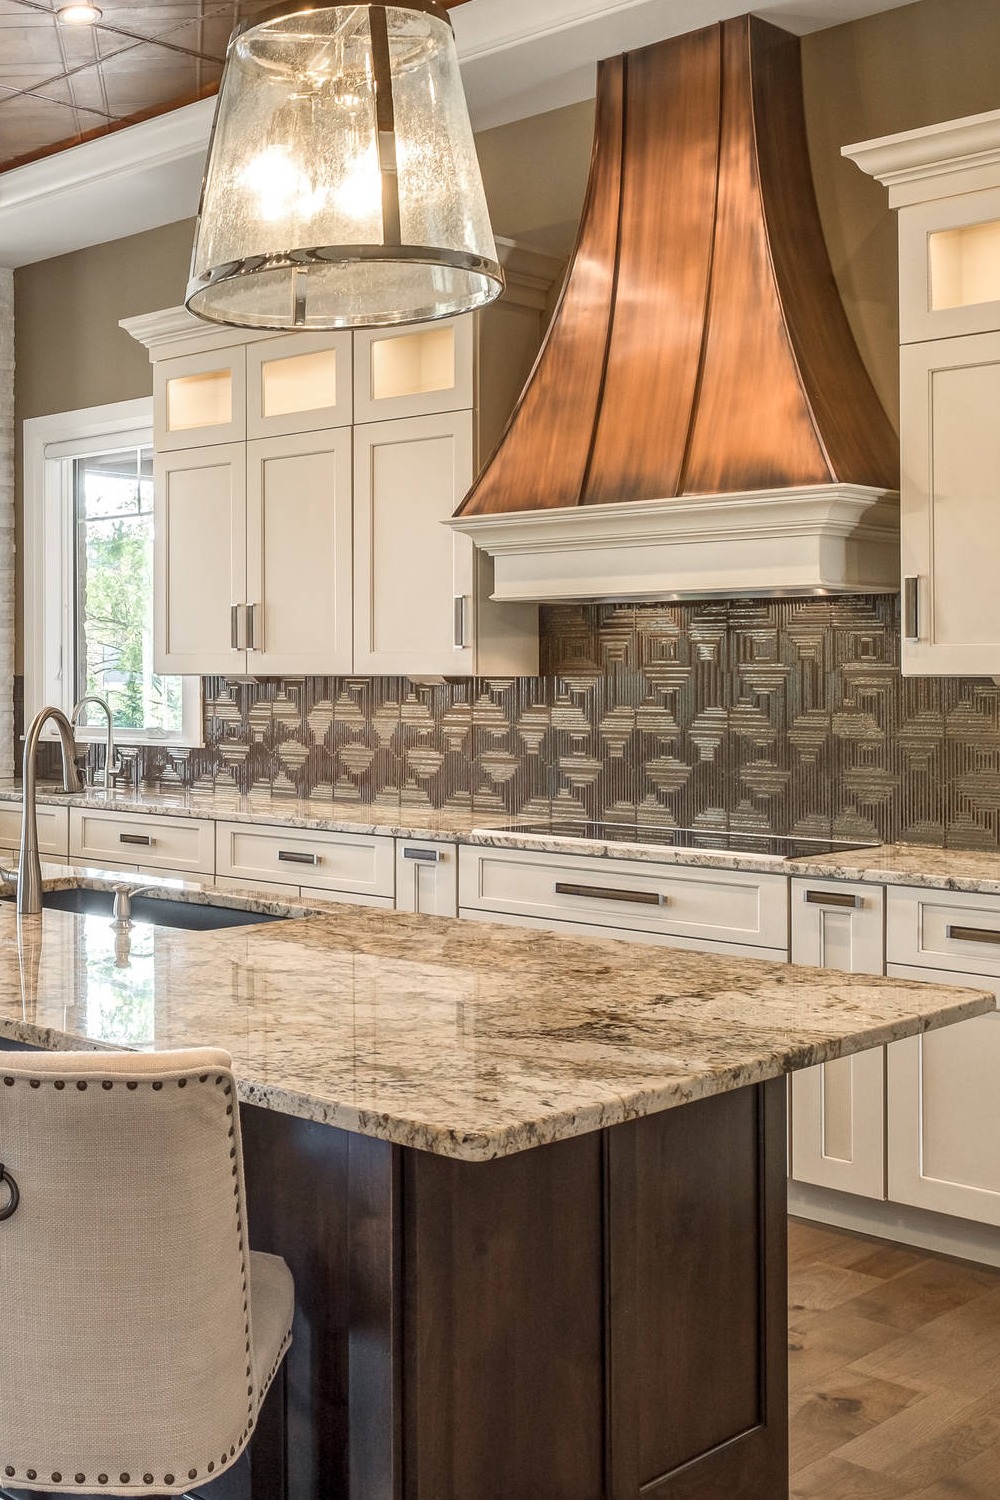 Marble Countertops Darker Shade Traditionally Styled Kitchen Fun Paint Color Beige Floor